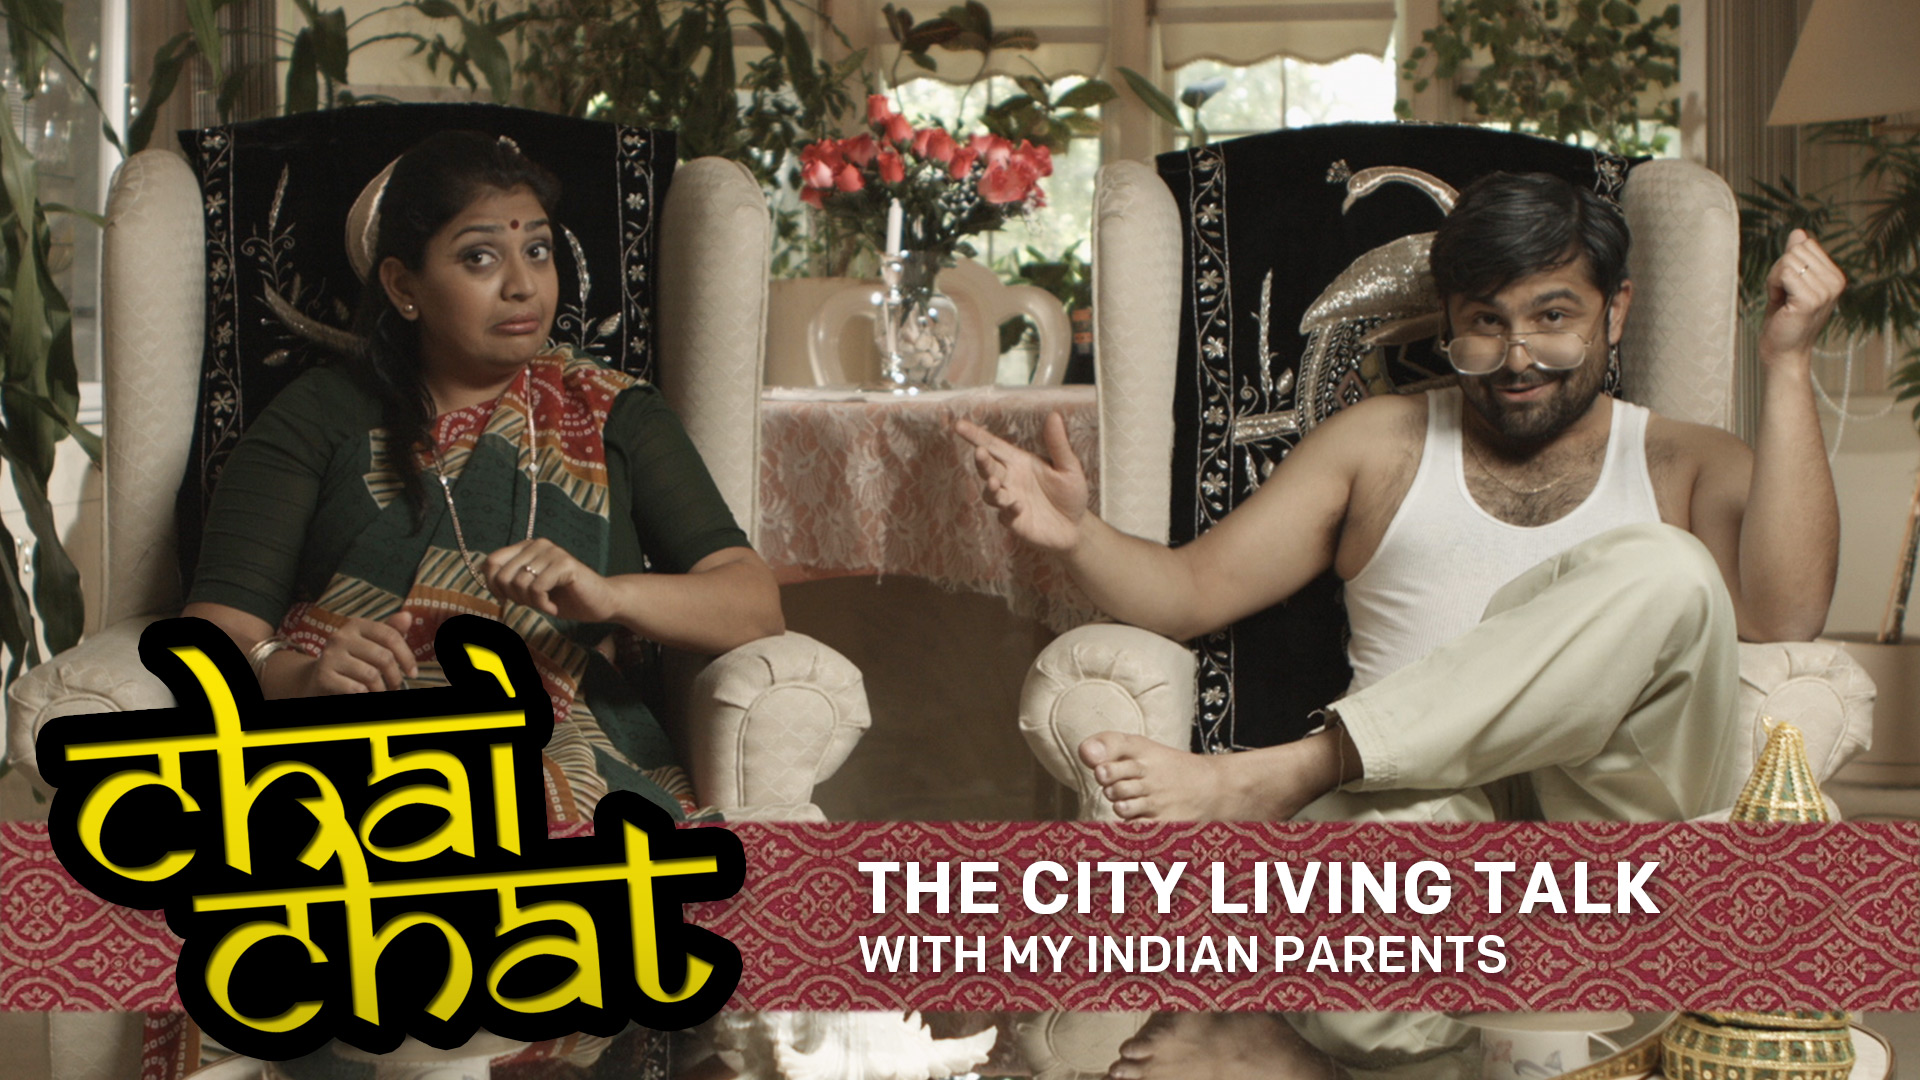 Chai Chat: The City Living Talk - With My Indian Parents